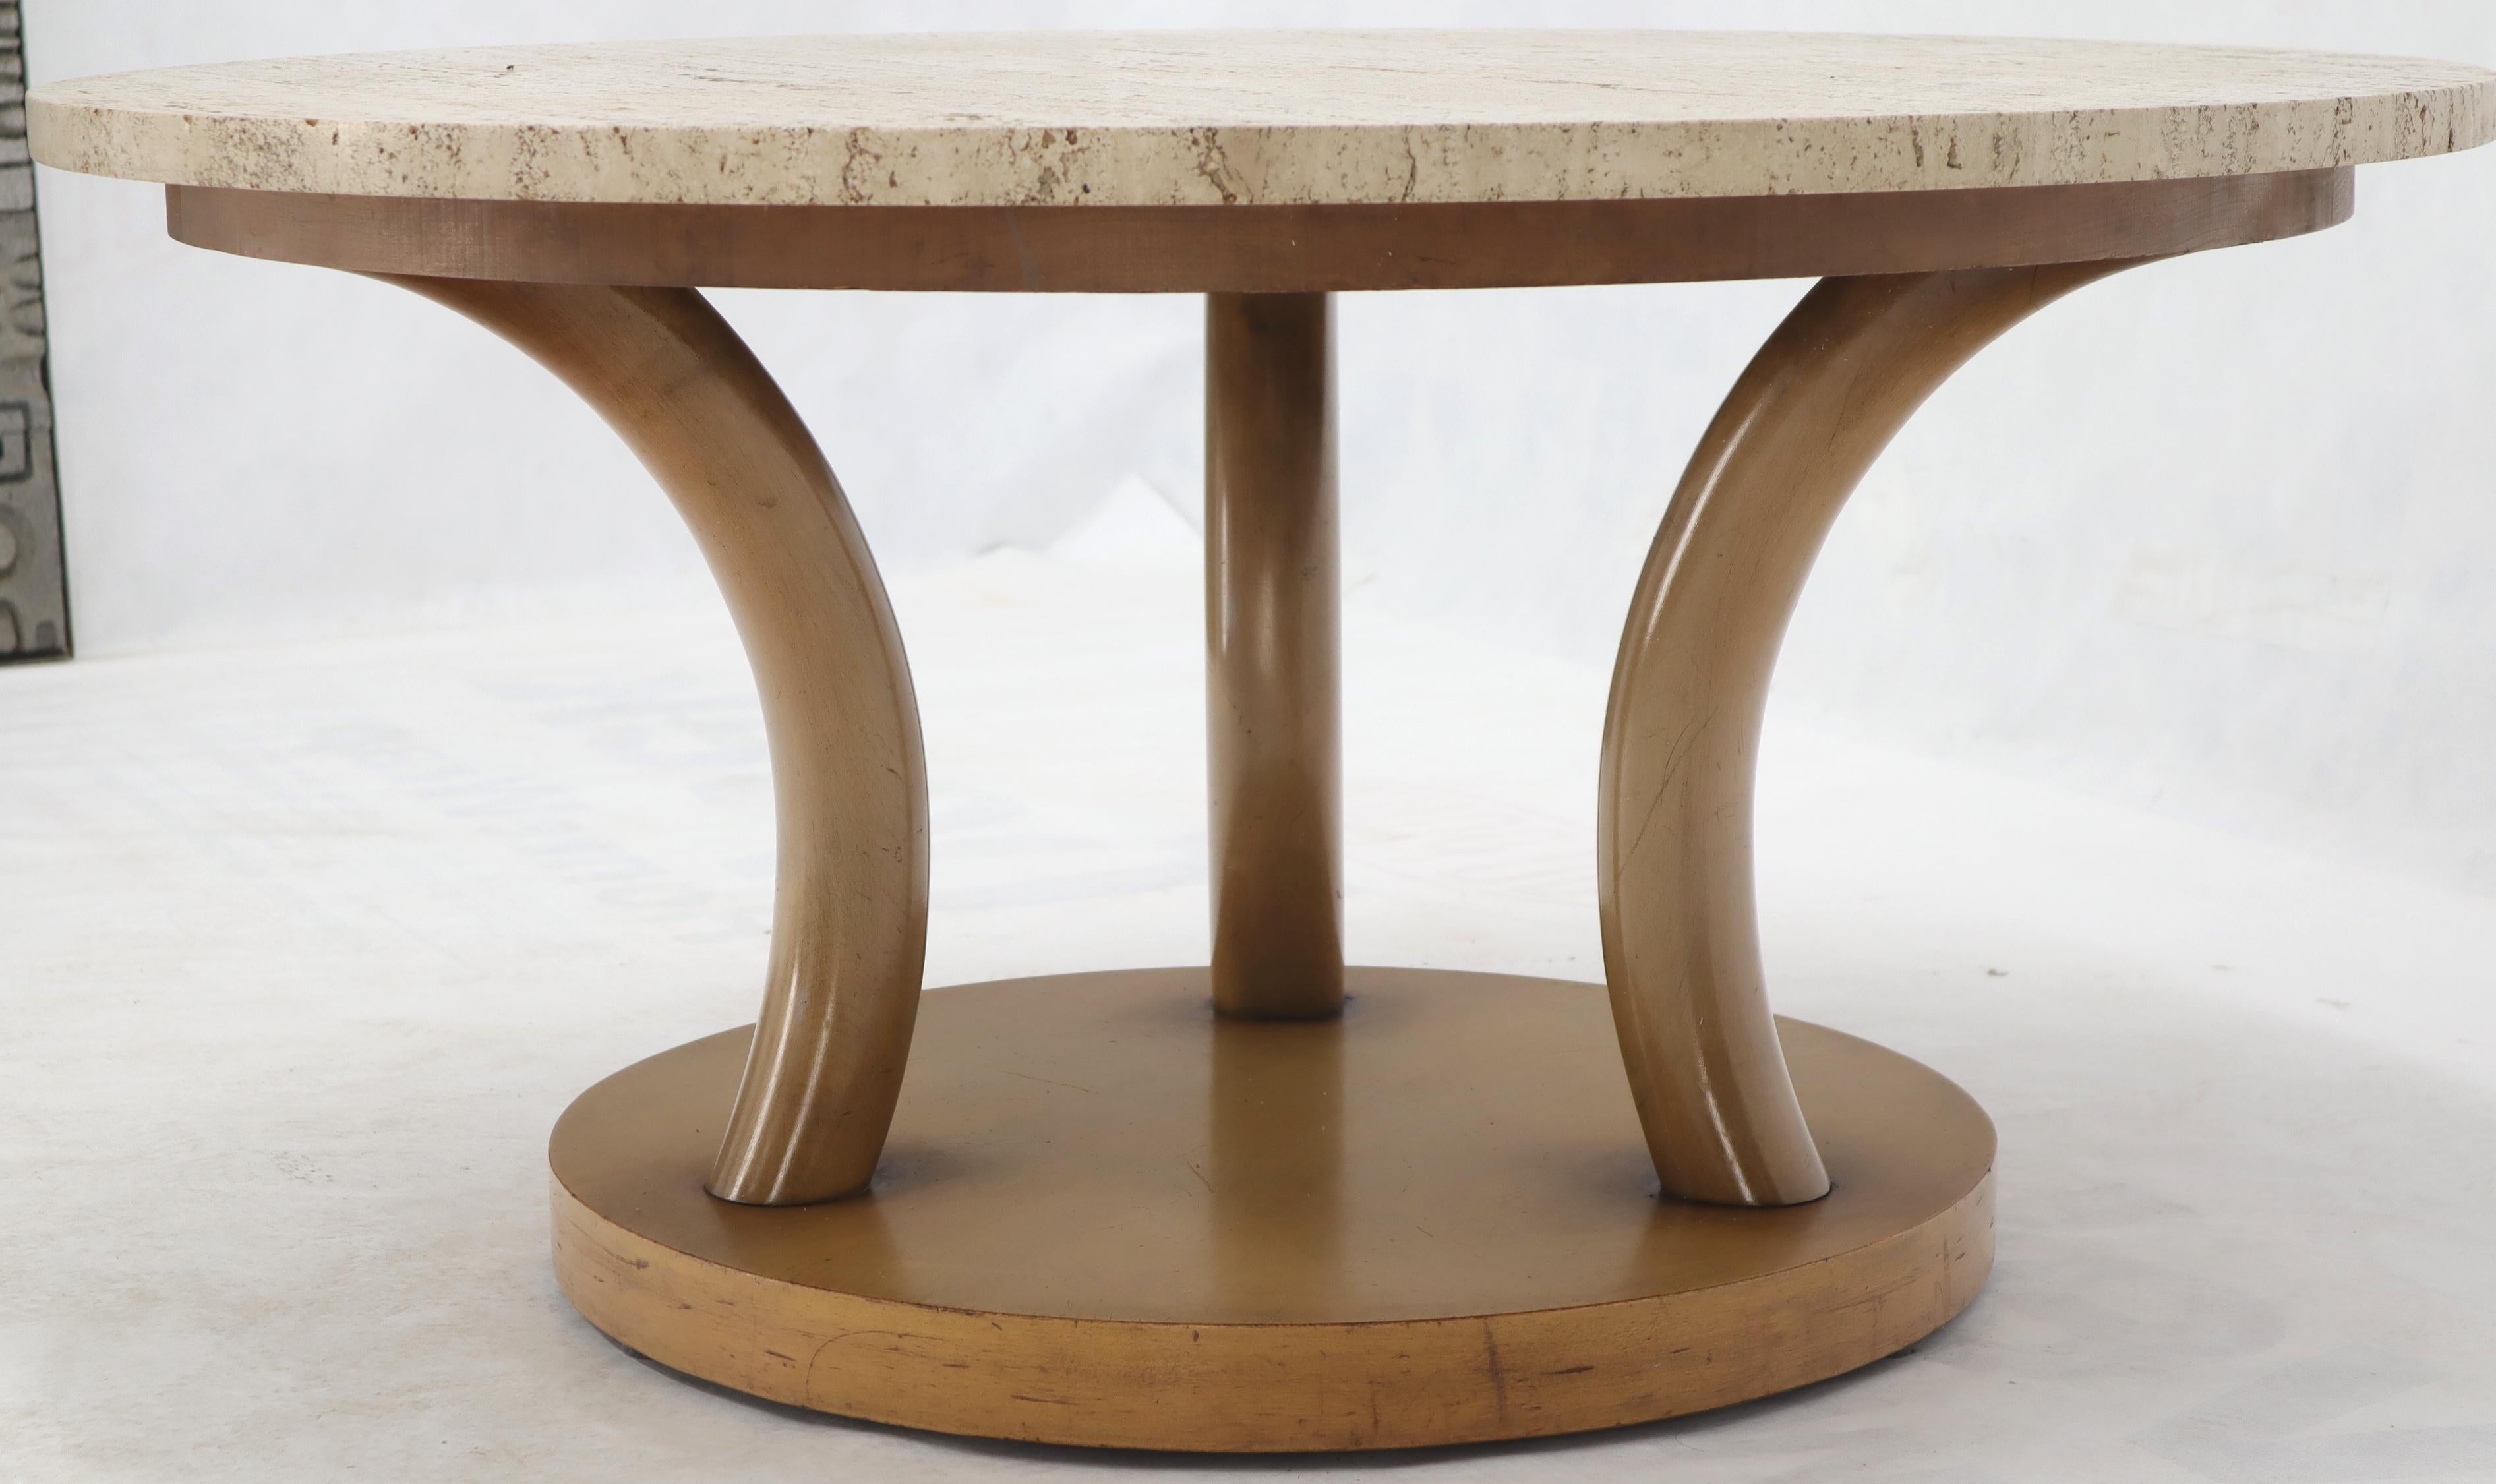 travertine Top Horn Like Pillars Tripod Base Round Coffee Table In Excellent Condition For Sale In Rockaway, NJ